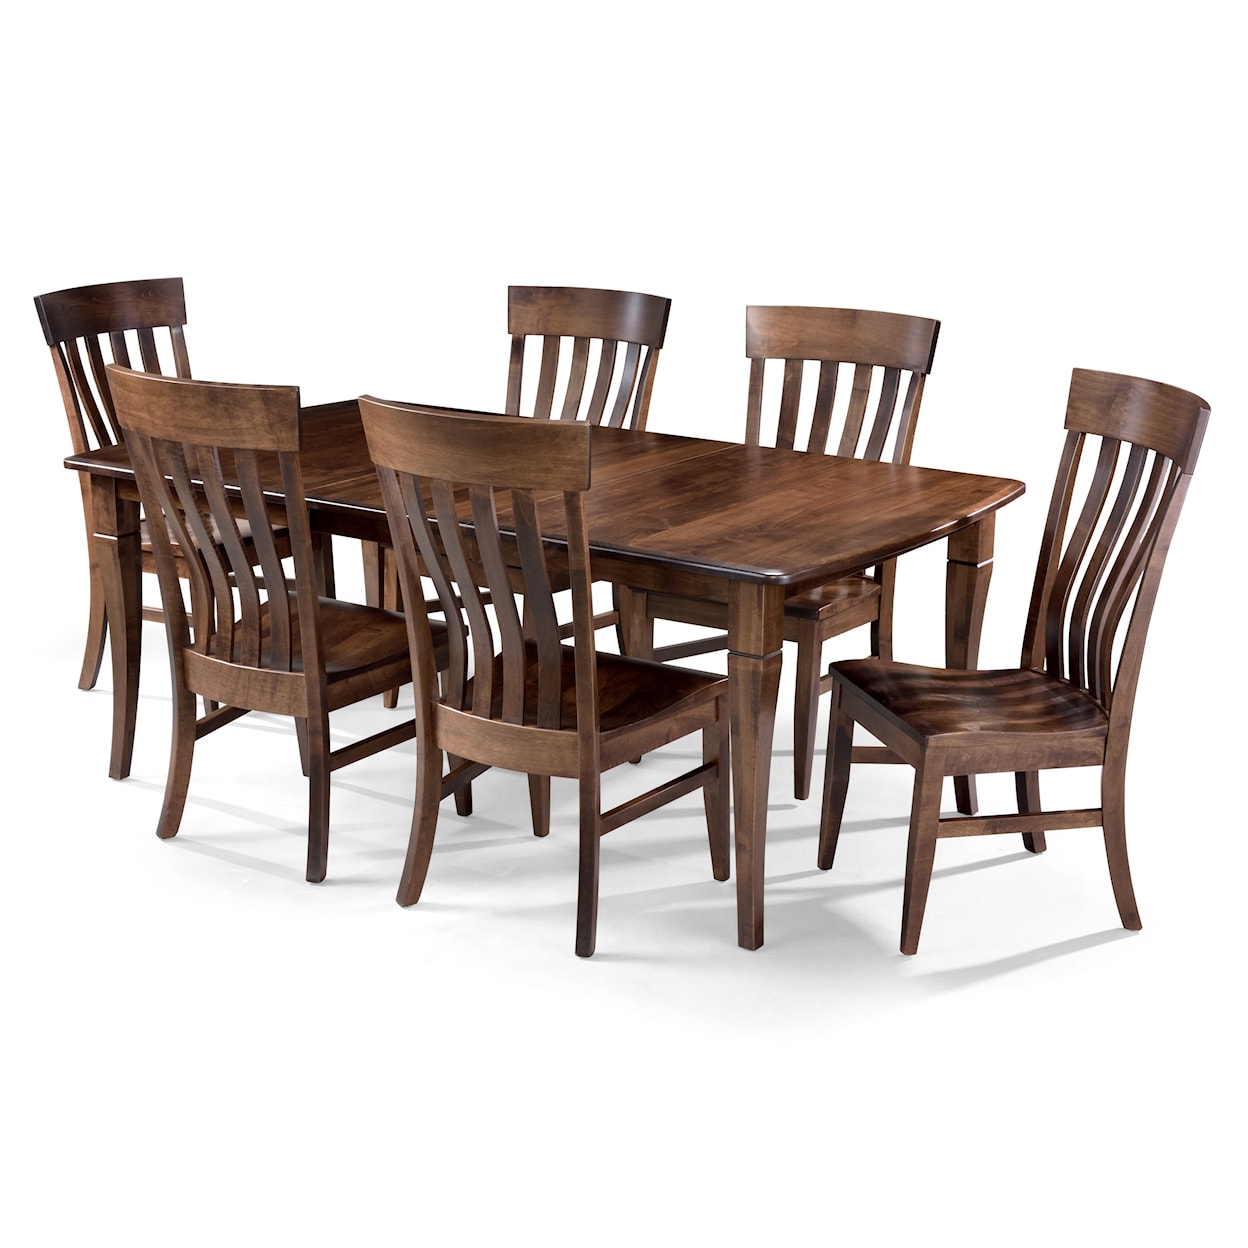 Archbold Furniture Amish Essentials Casual Dining 7pc Bow End Dining Set